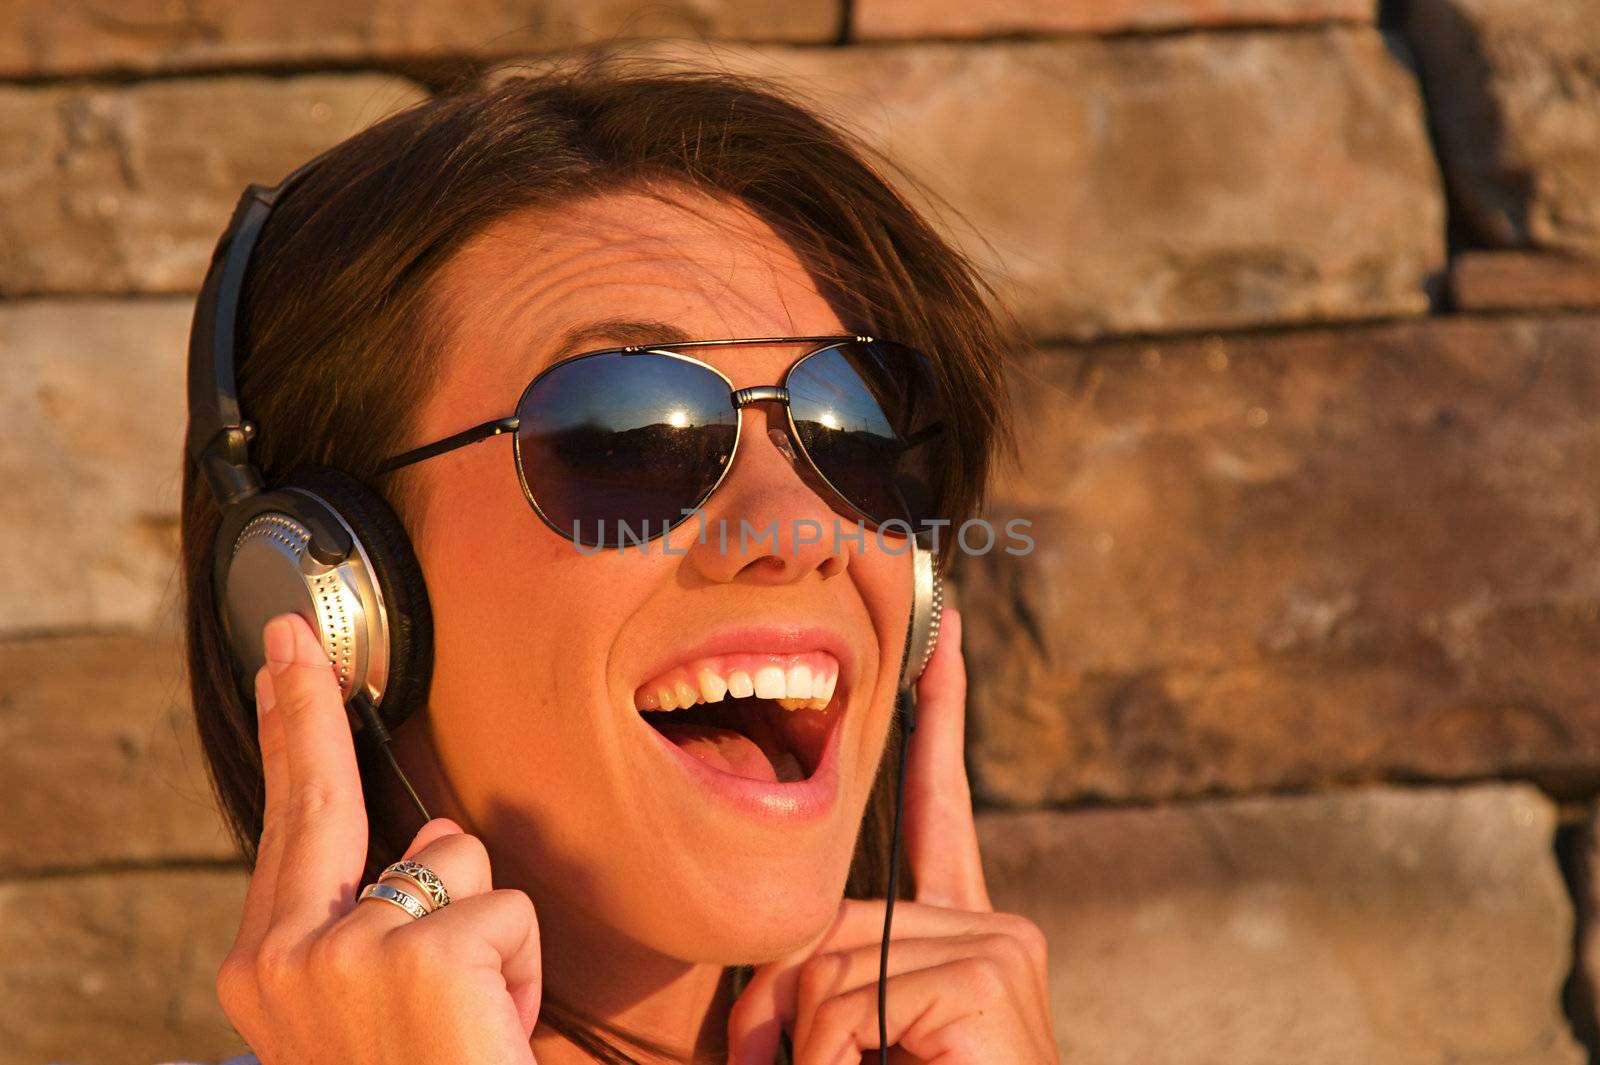 A cool young woman listens to music on some headphones